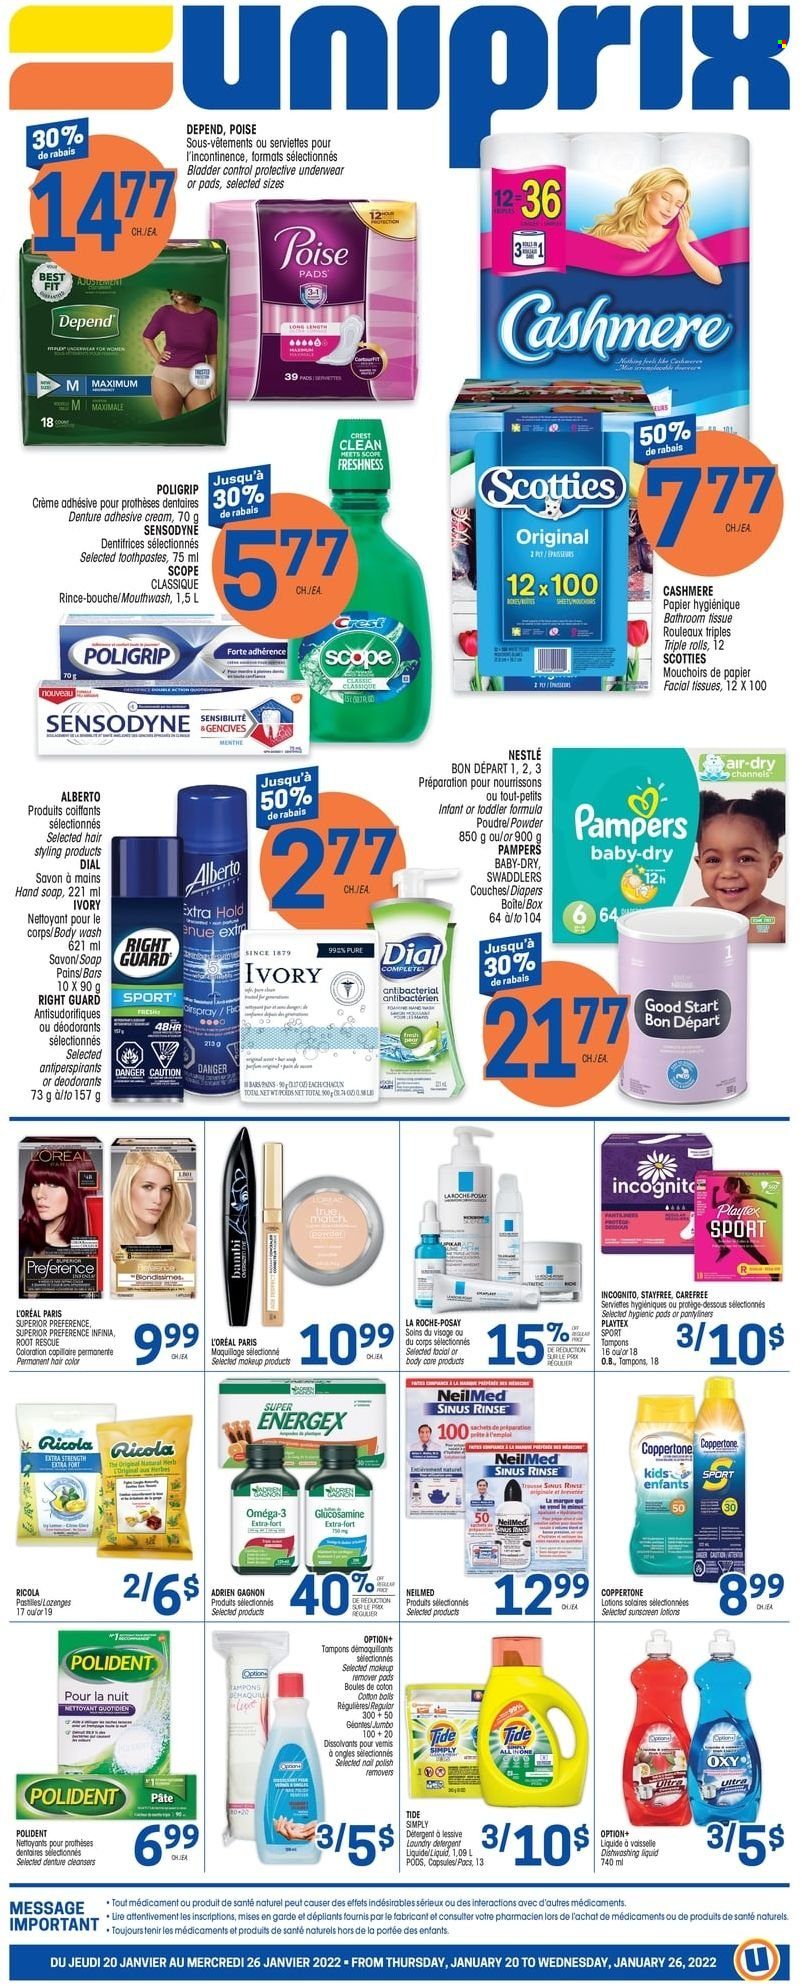 thumbnail - Uniprix Flyer - January 20, 2022 - January 26, 2022 - Sales products - Ricola, nappies, bath tissue, Tide, body wash, hand soap, Dial, soap, mouthwash, Polident, Crest, Stayfree, Playtex, Carefree, tampons, facial tissues, L’Oréal, La Roche-Posay, hair color, sunscreen lotion, polish, makeup, Omega-3, Nestlé, detergent, Pampers, Sensodyne, deodorant. Page 1.